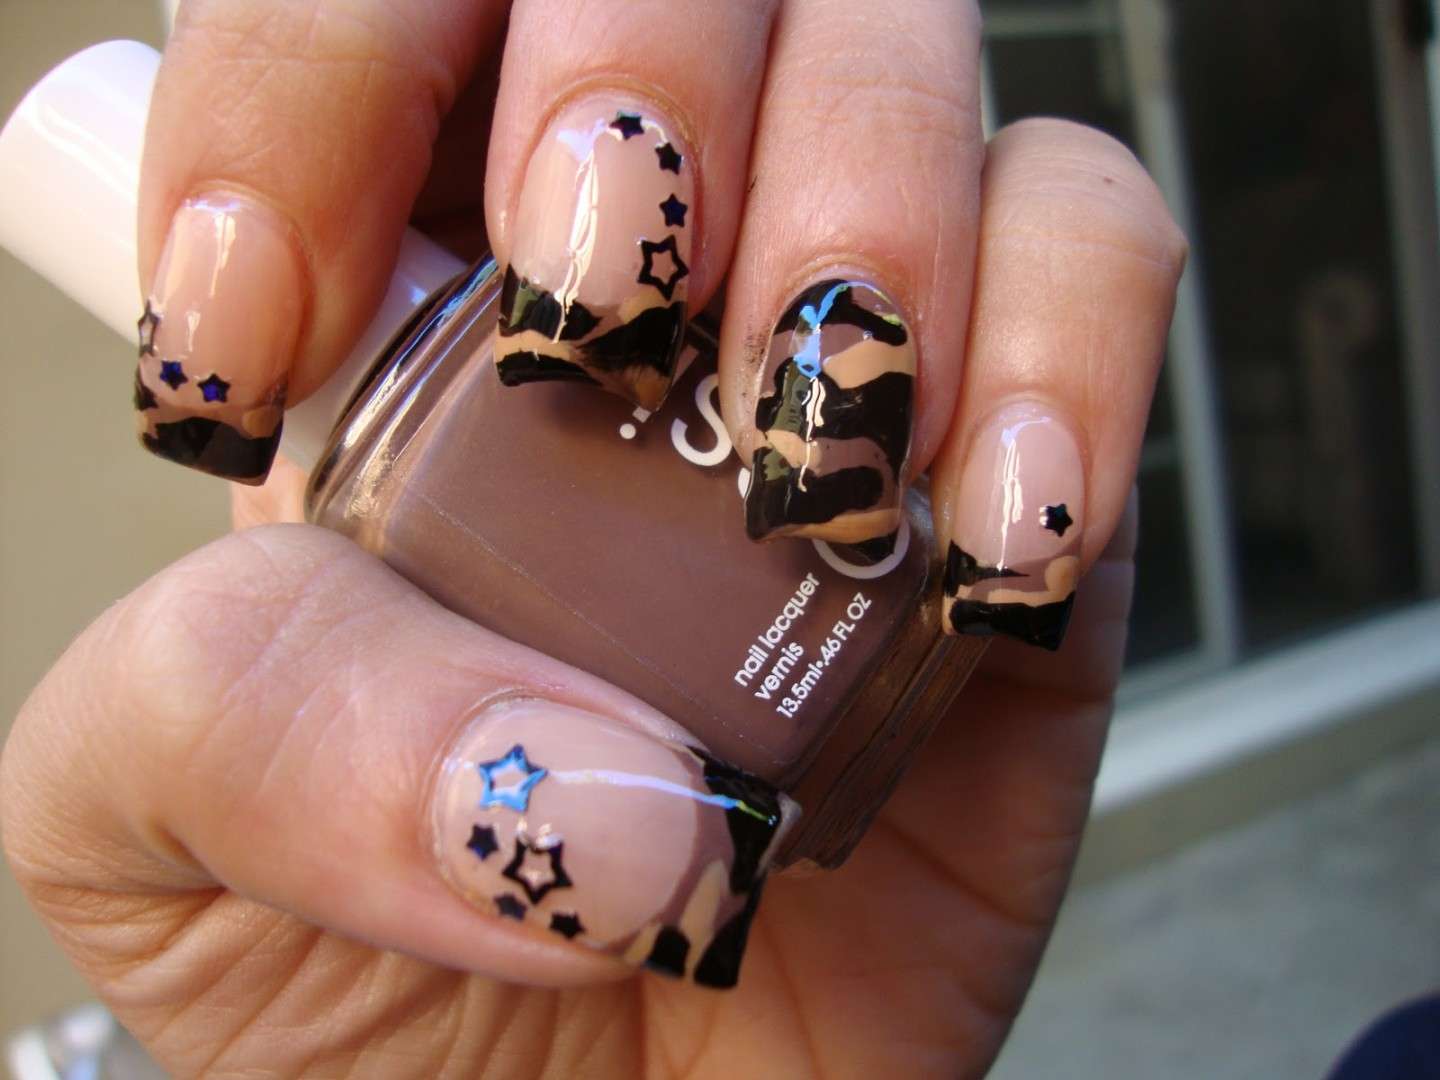 Nail art camouflage con stelle